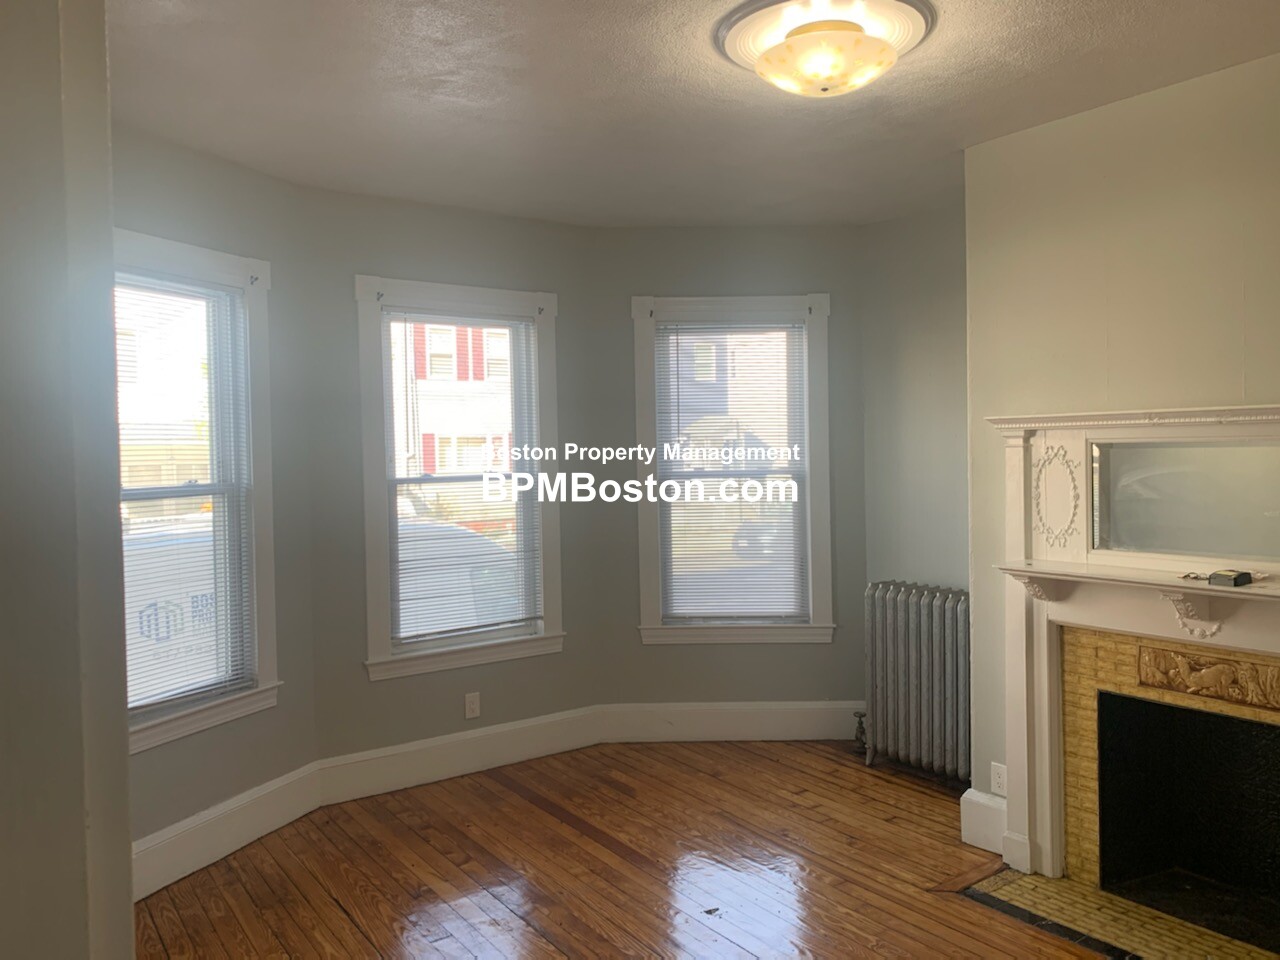 Photos of apartment on Division St.,Chelsea MA 02150